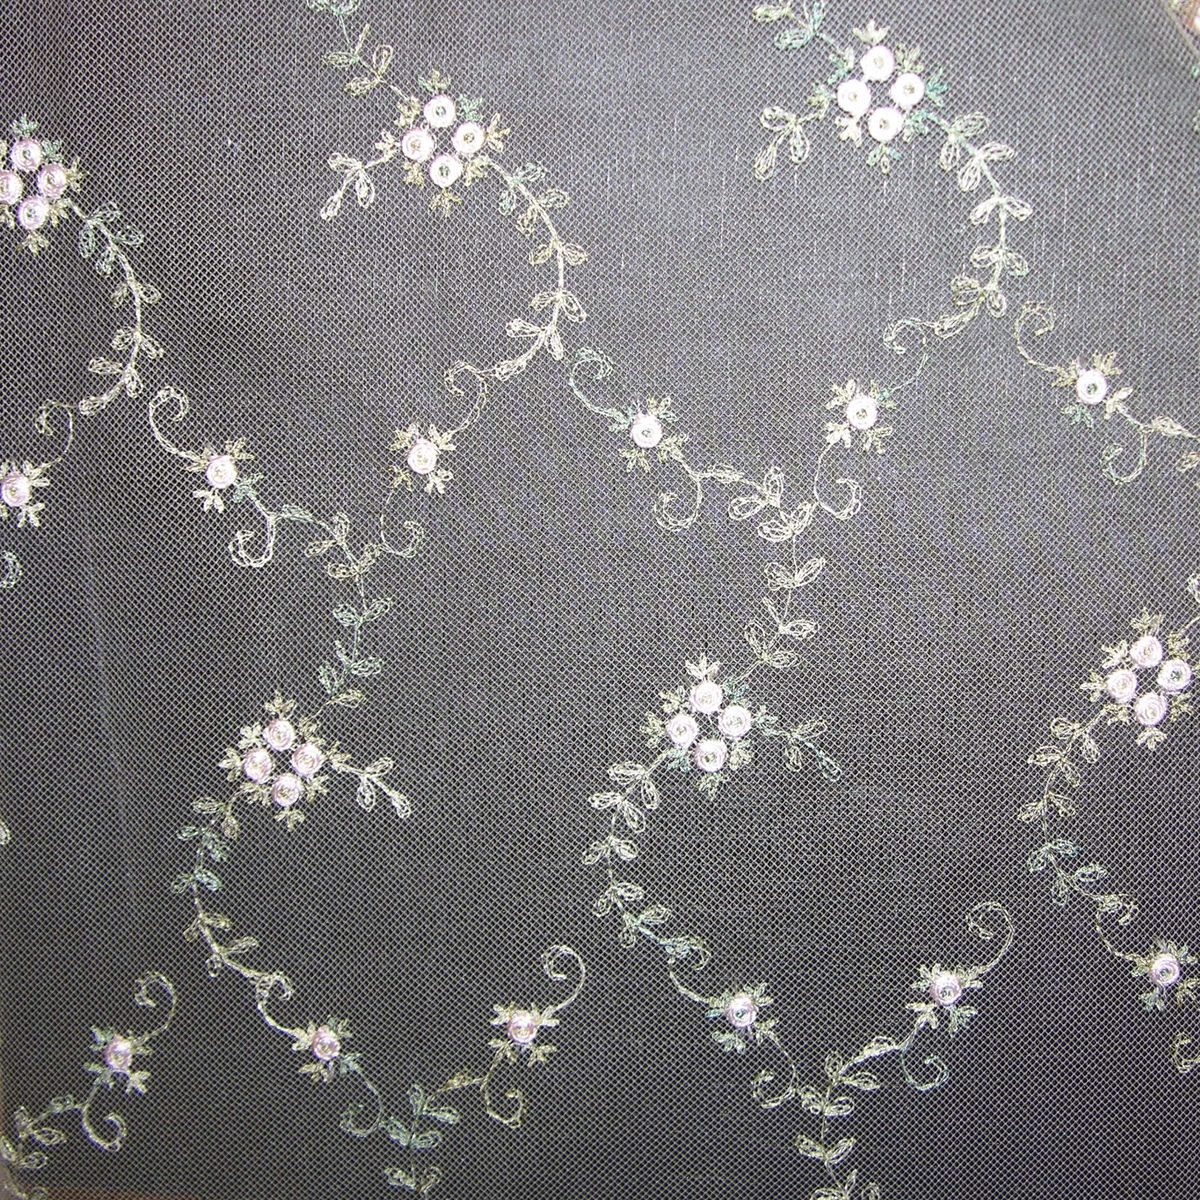 Florinette Sheer fabric in blossom color - pattern number AU 44228075 - by Scalamandre in the Old World Weavers collection